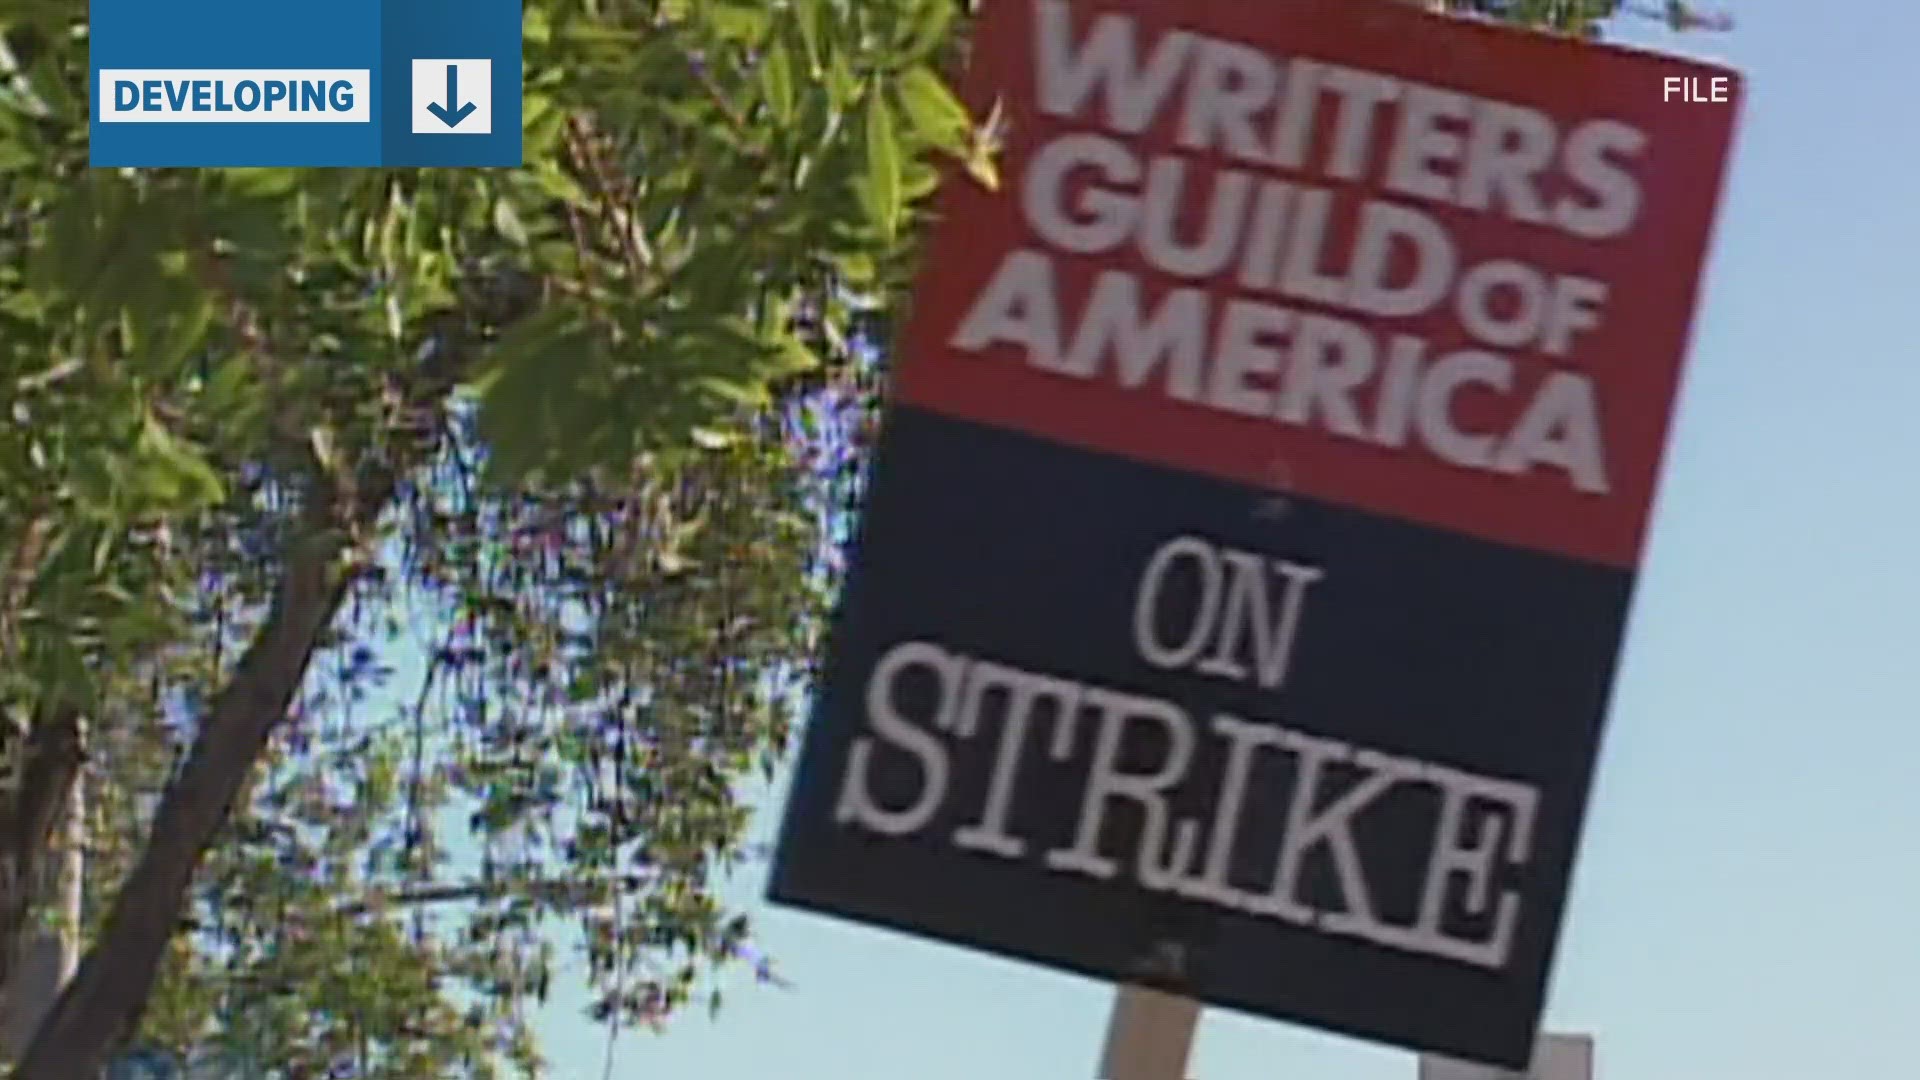 Hollywood writers' strikes have often been lengthy. The last one lasted 100 days.